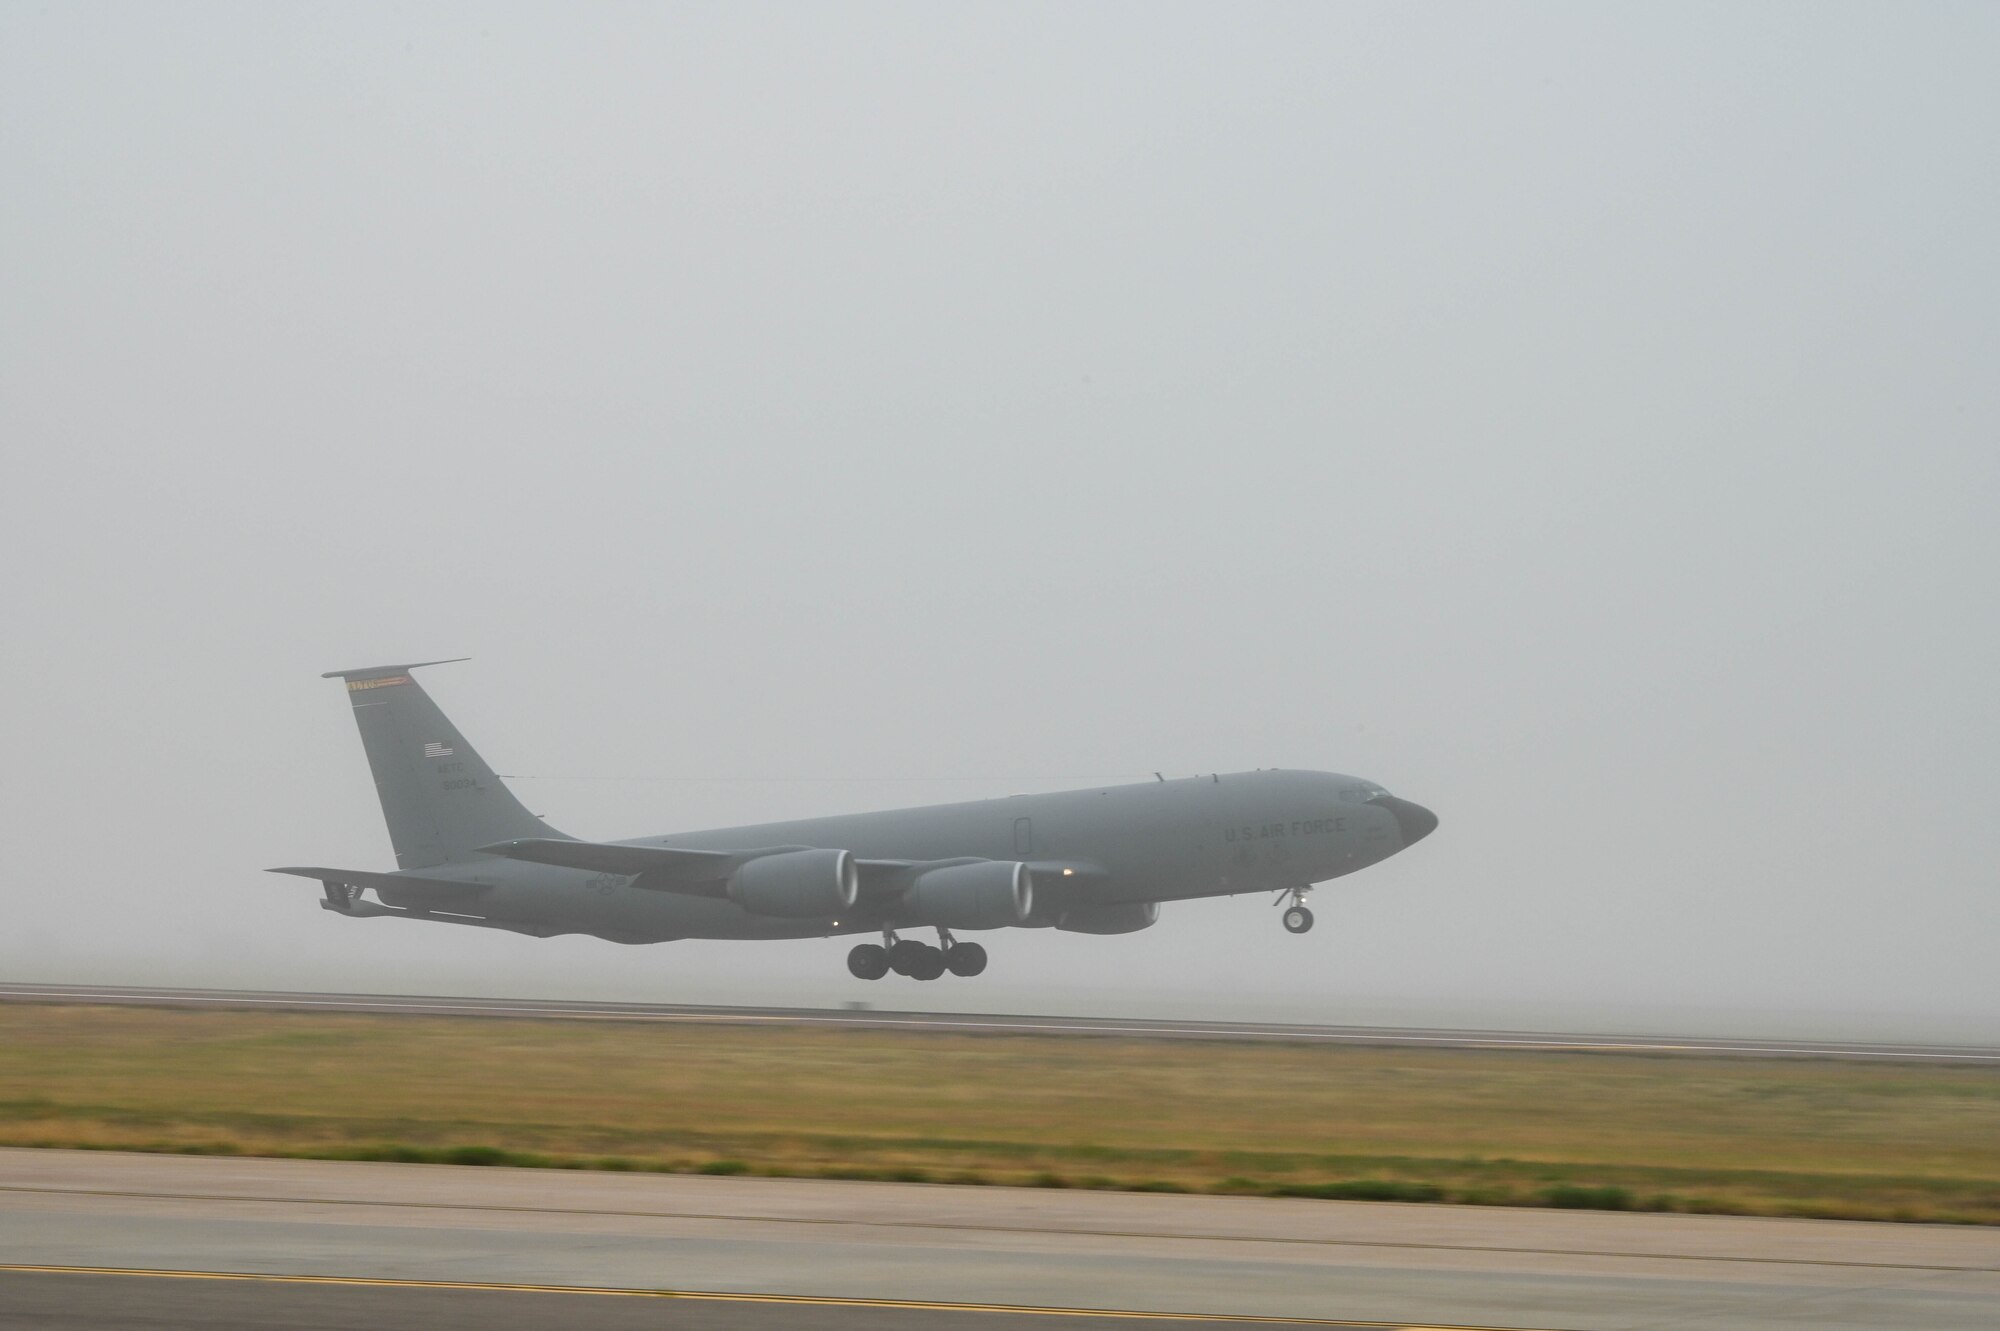 A KC-135 Stratotanker takes off due to an incoming severe weather forecast at Altus Air Force Base (AAFB), Oklahoma, May 4, 2022. Despite the severe weather flyaway, the 97th Operations Group was able to continue student training, fulfilling the 97th Air Mobility Wing’s vision to “forge the world’s most inspired, proficient and adaptive mobility warriors to deliver airpower for America.” (U.S. Air Force photo by Senior Airman Kayla Christenson)